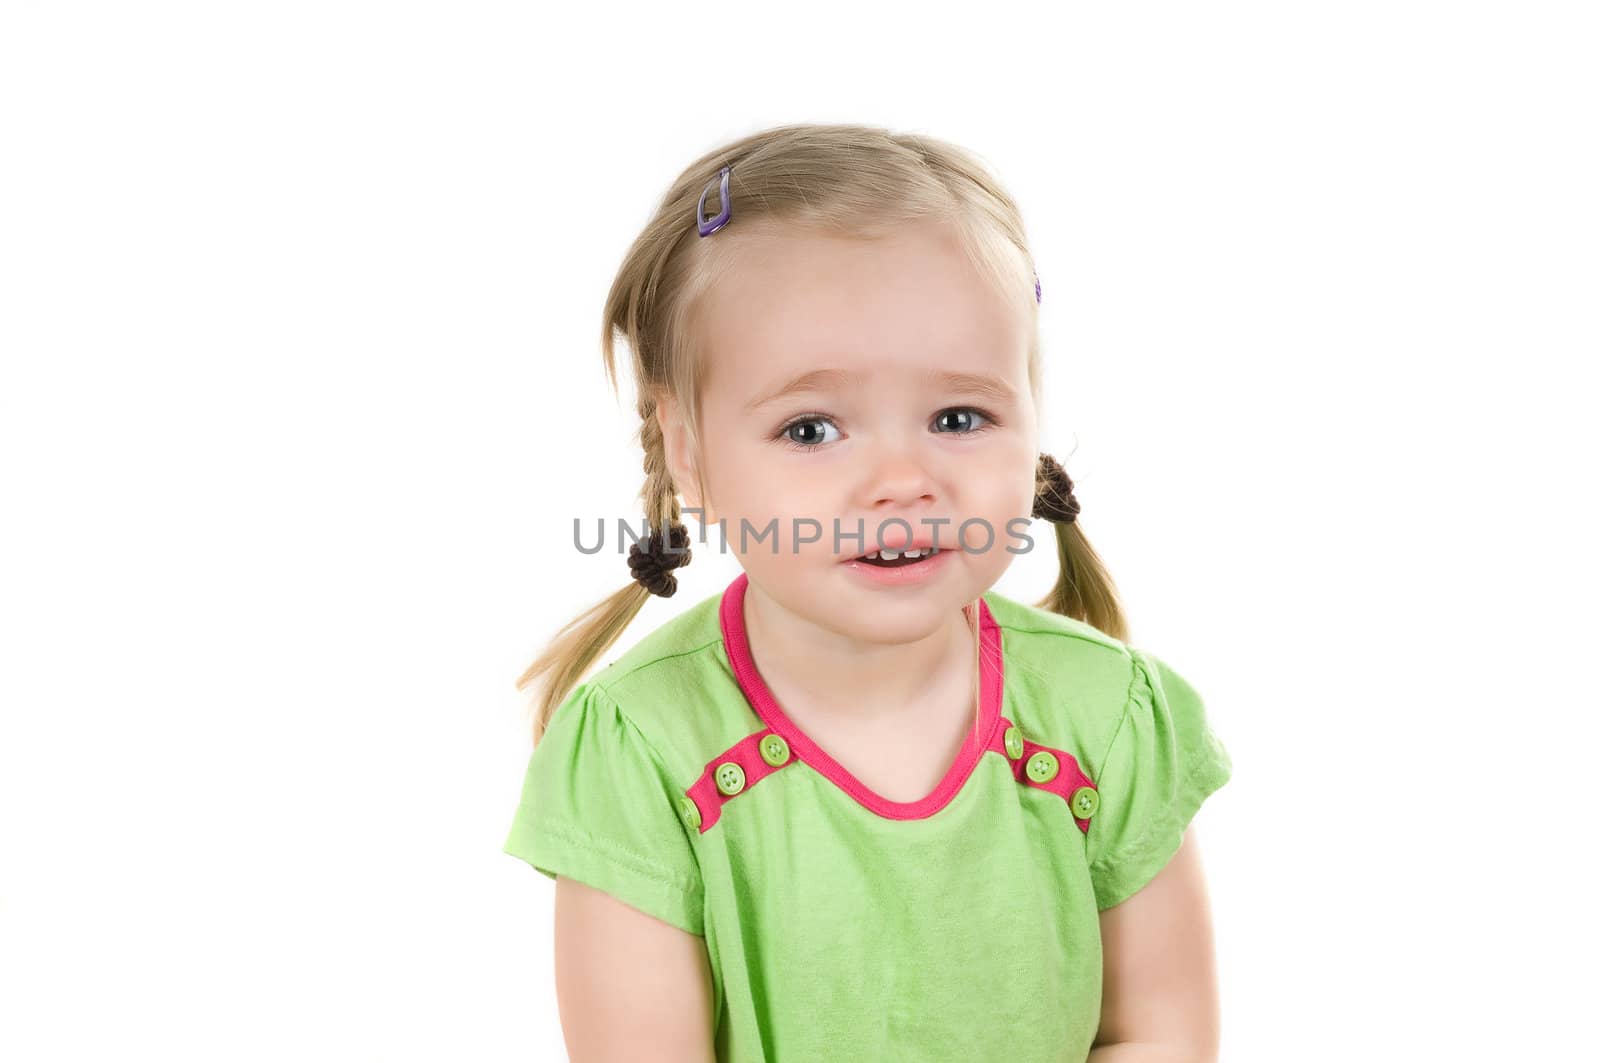 A little girl in studio by anytka